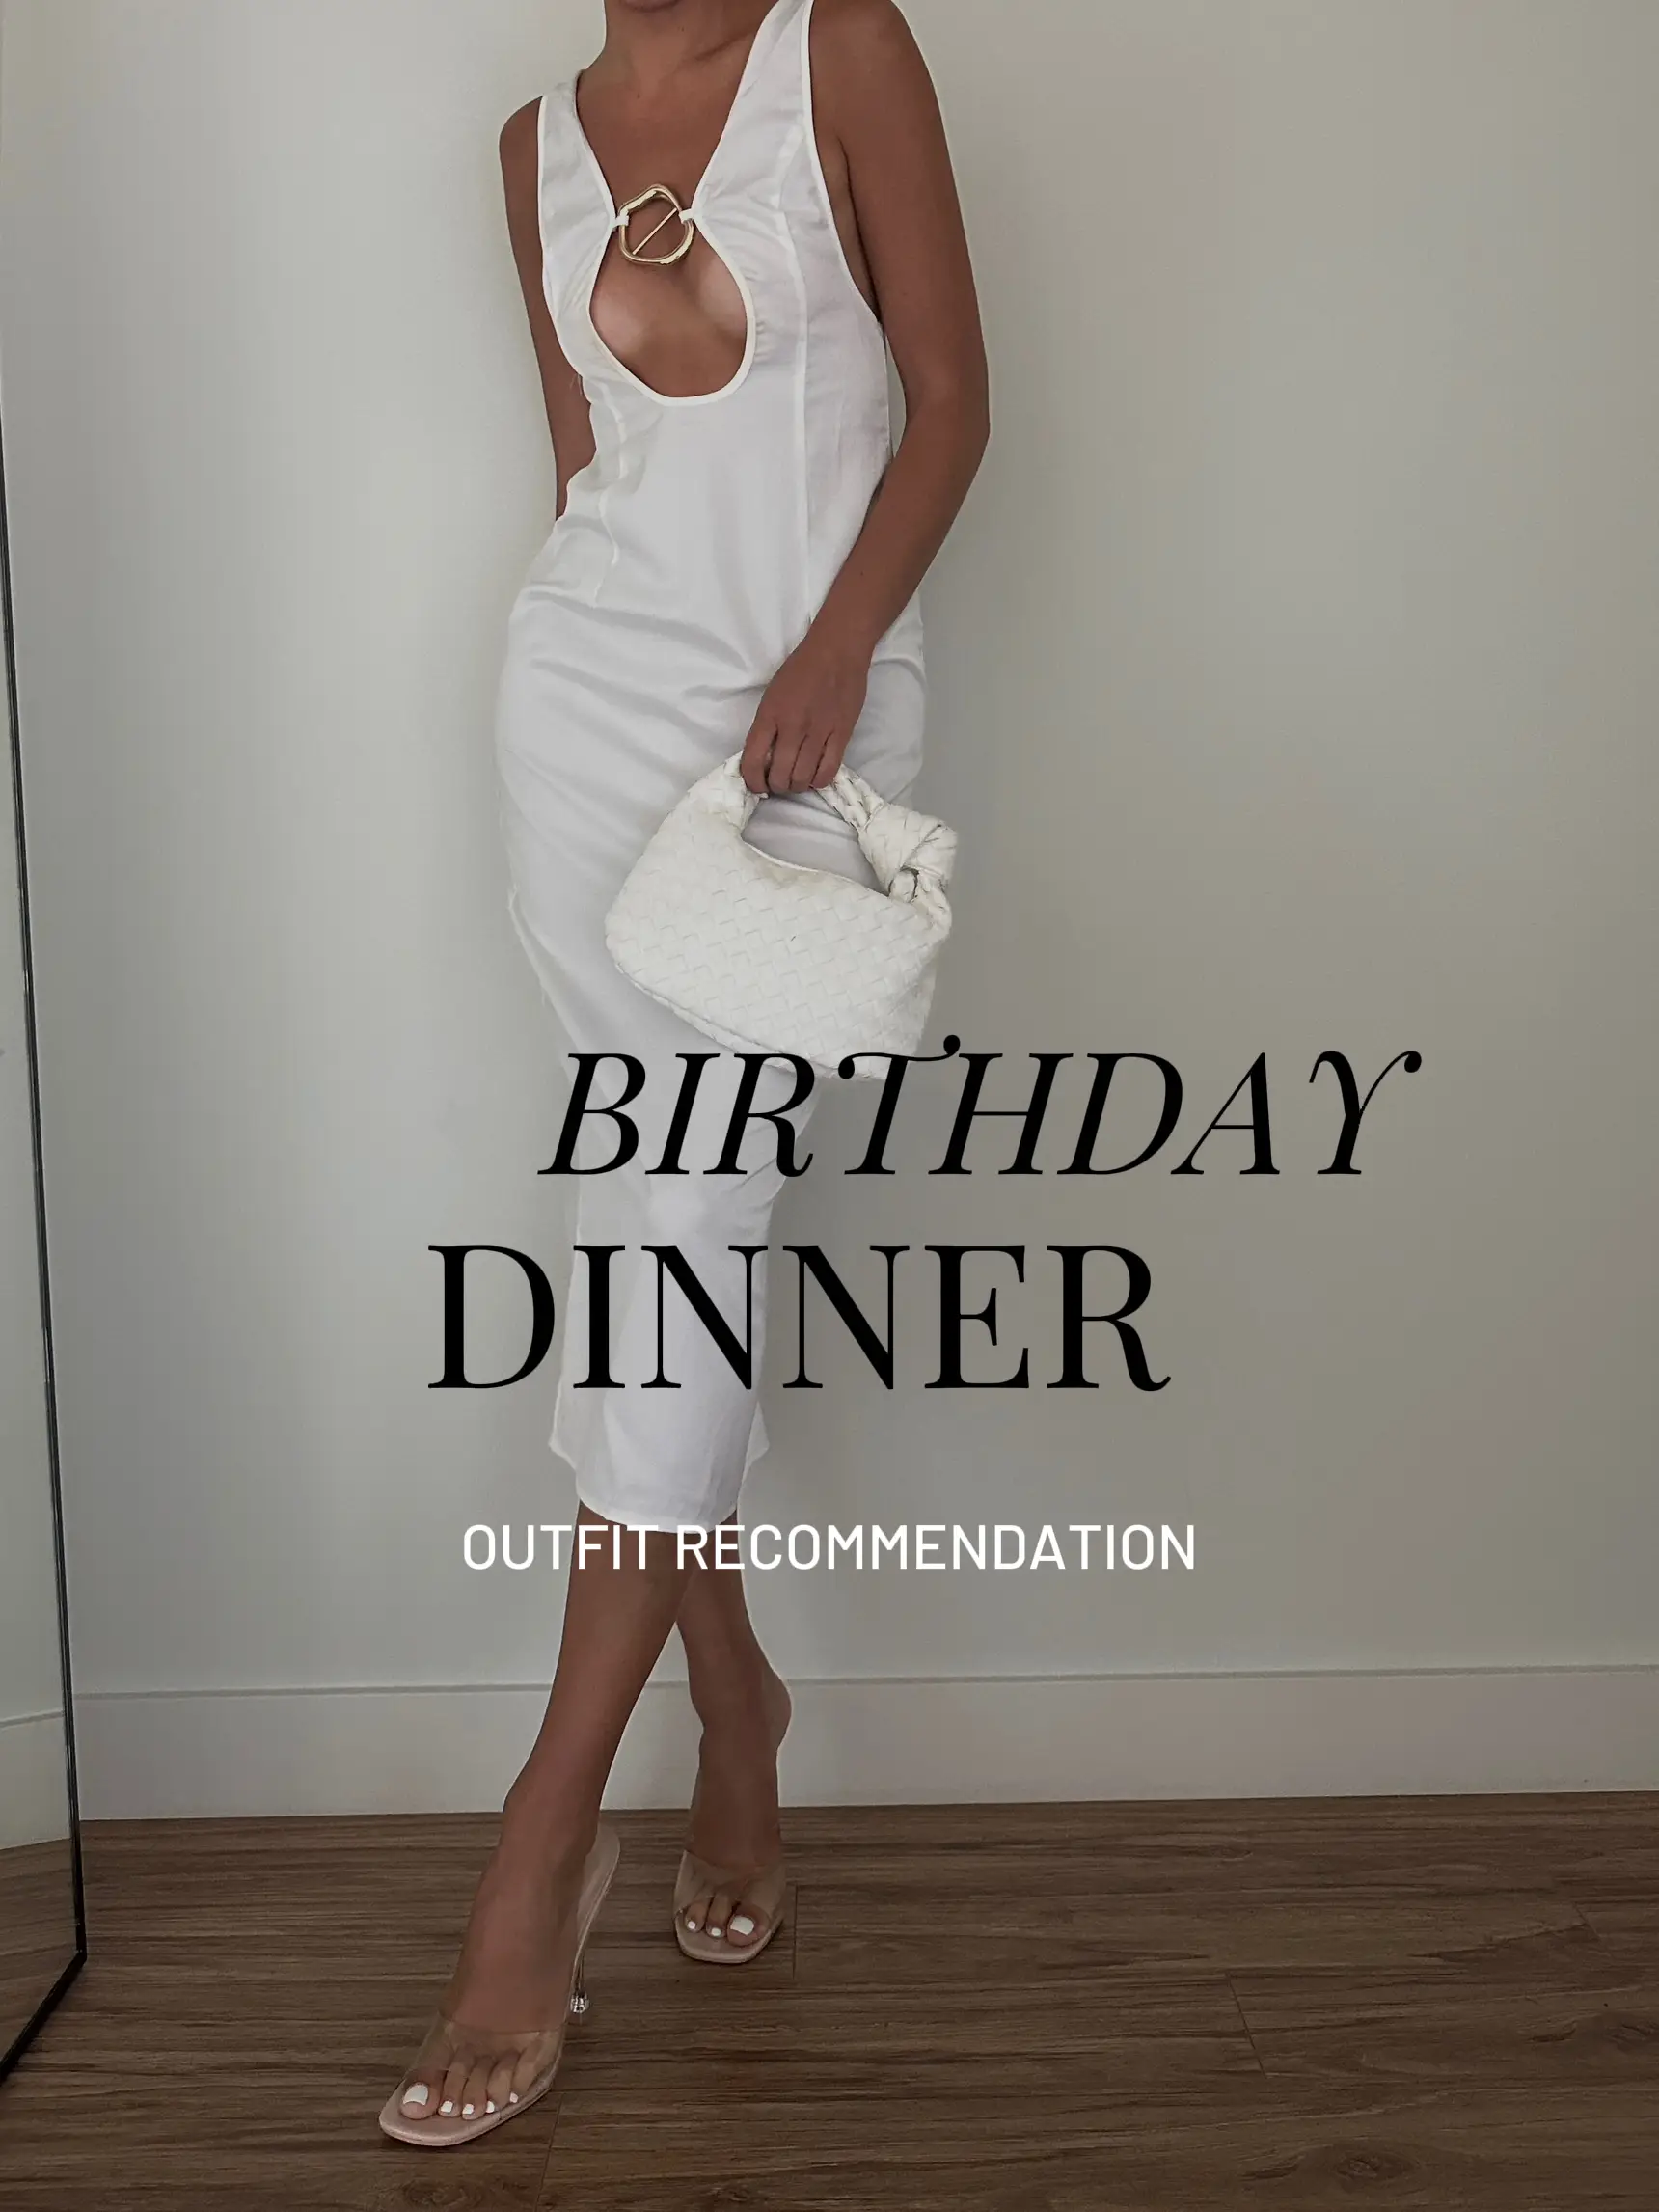 BIRTHDAY DINNER OUTFIT RECOMMENDATION